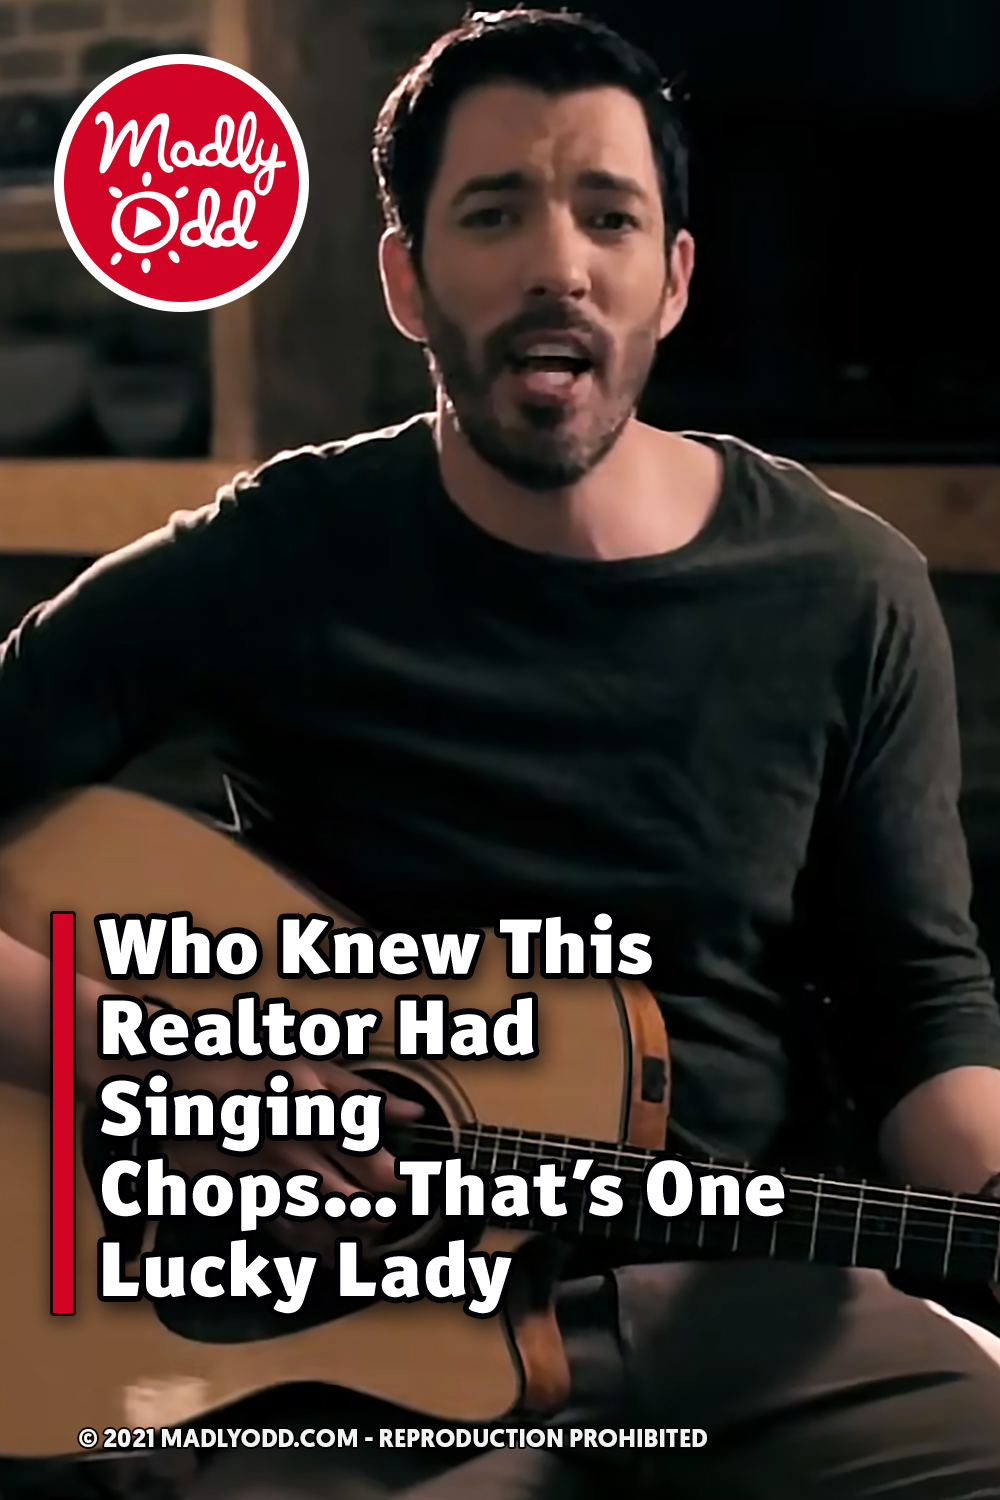 Who Knew This Realtor Had Singing Chops...That’s One Lucky Lady